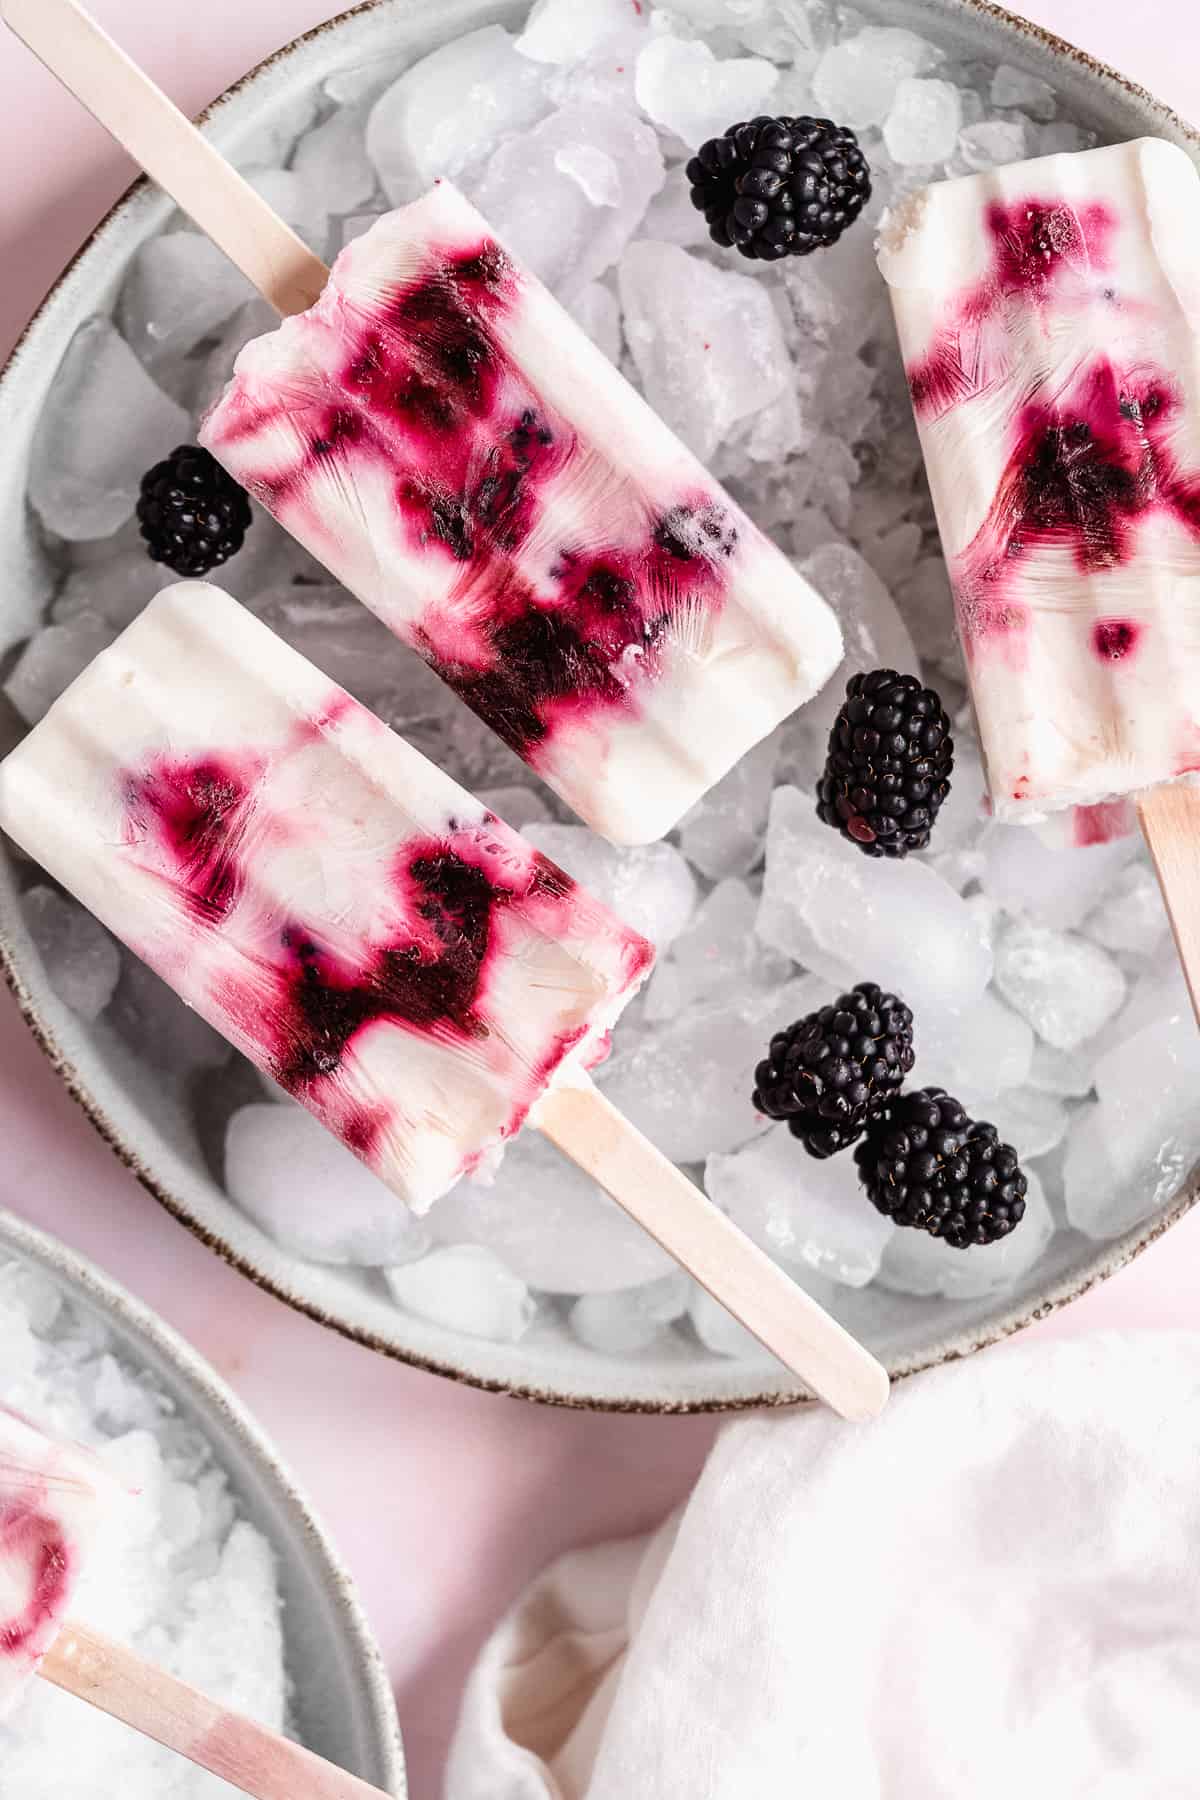 Overhead photo of three blackberry popsicles on a plate with ice.  Blackberries are sprinkled around the popsicles.  